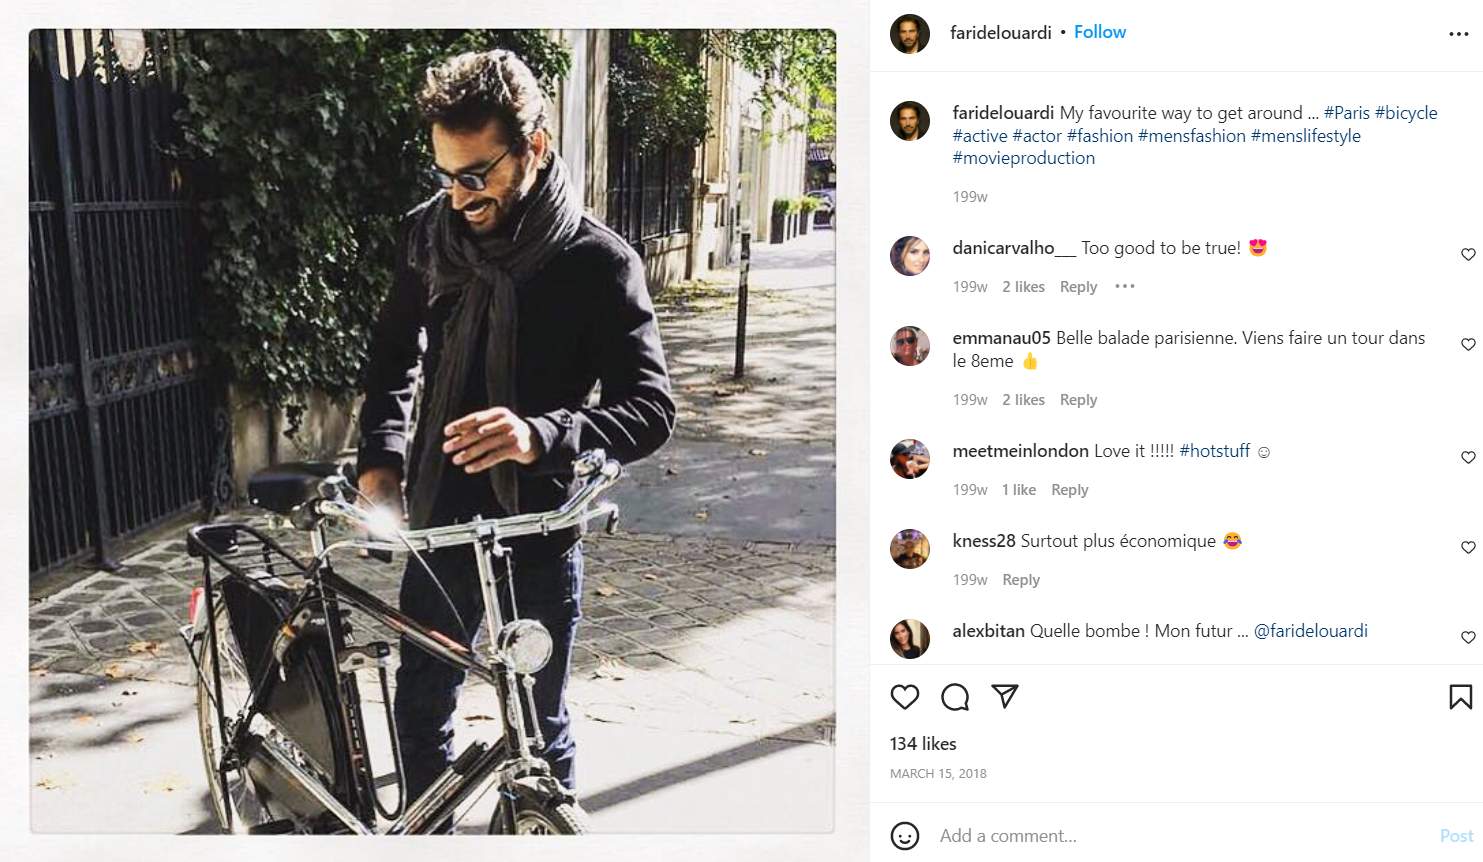 Farid Elouardi posted on Instagram about cycling trips